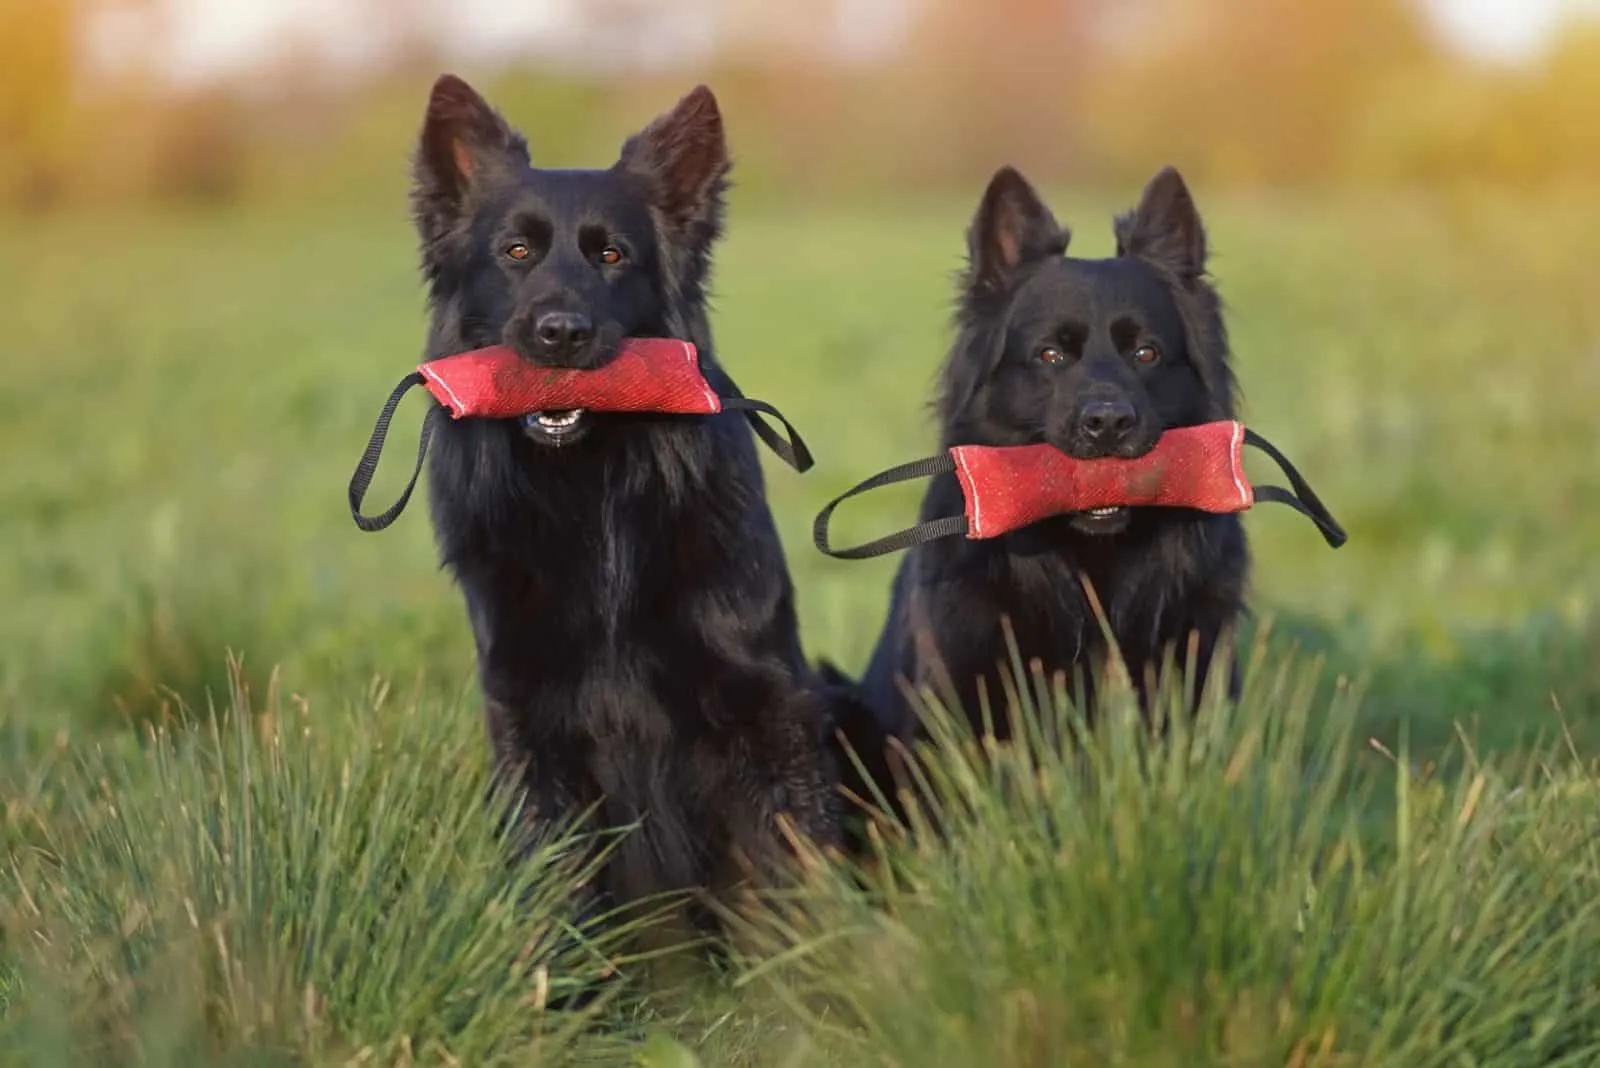 Two obedient long-haired black German Shepherd dogs sitting together in a green grass holding red soft bite tug toys in their mouths